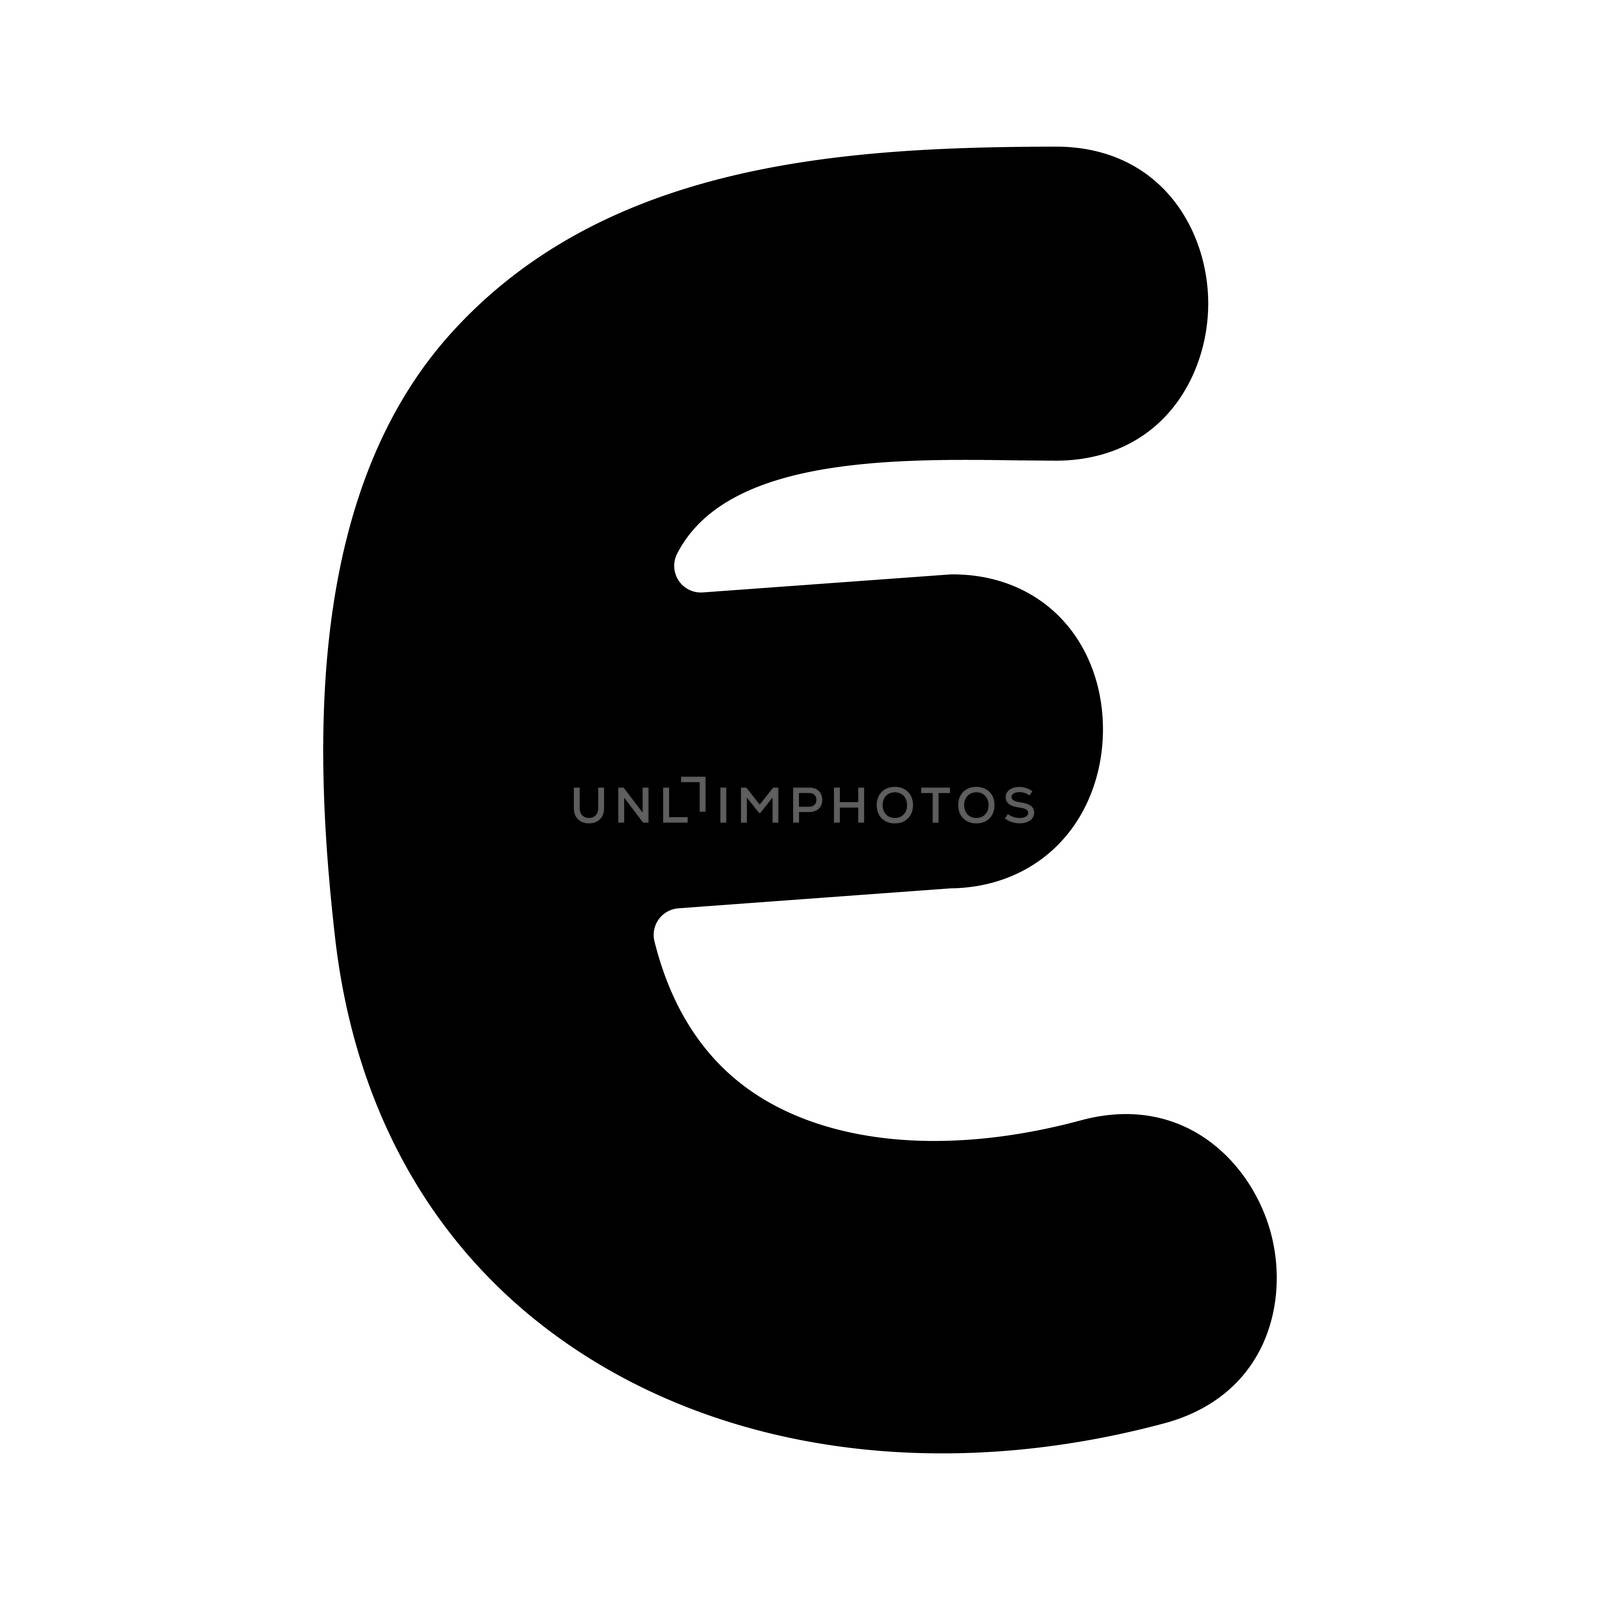 Original font, hand drawn funny fat capital letter isolated on white, part of a full series

